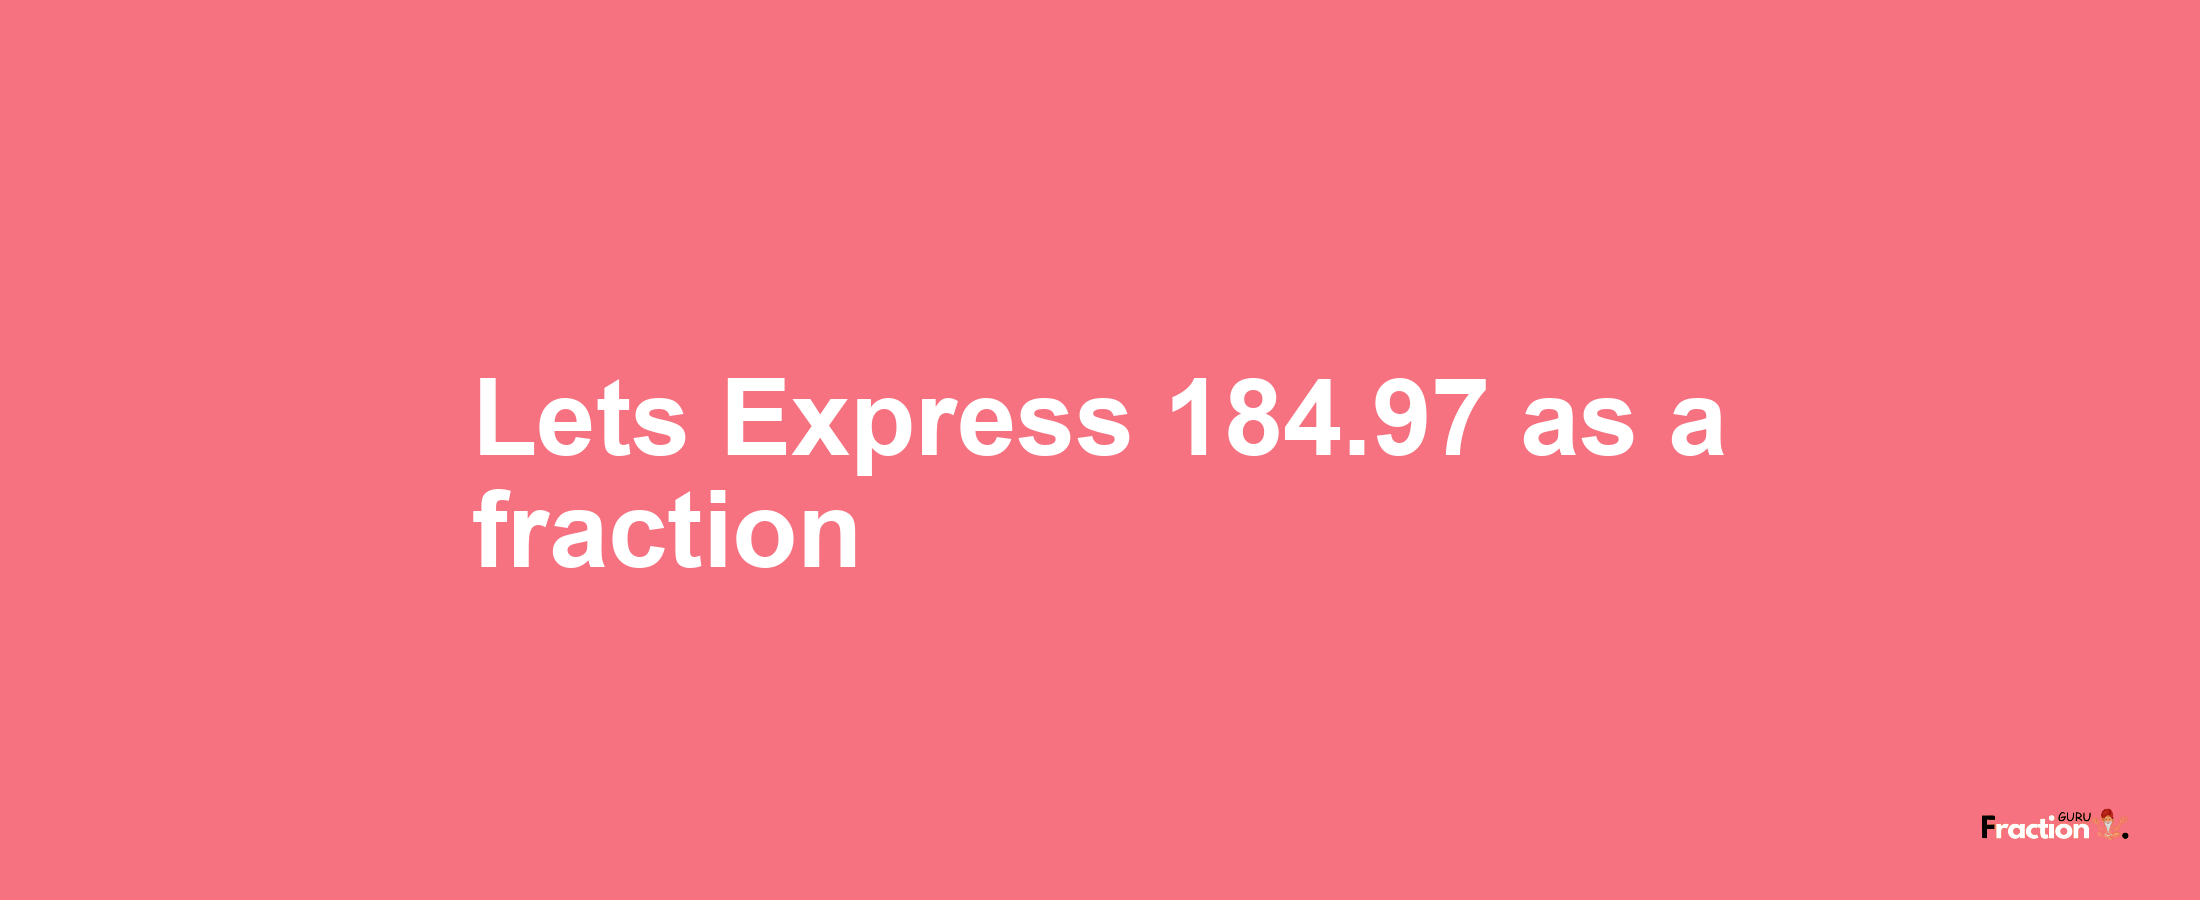 Lets Express 184.97 as afraction